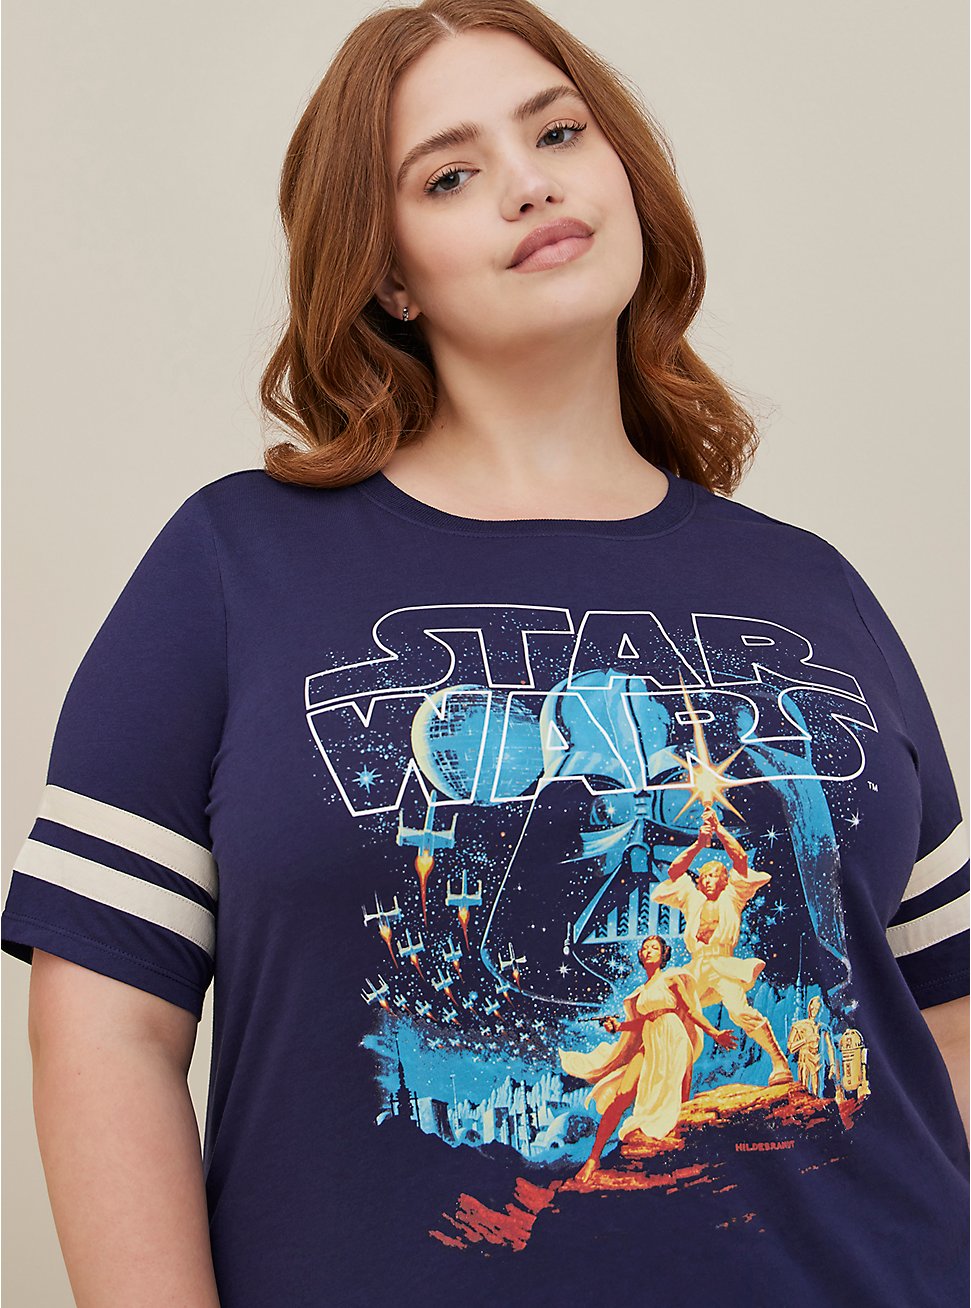 Star Wars Classic Fit Football Tee - Heritage Cotton Navy Blue